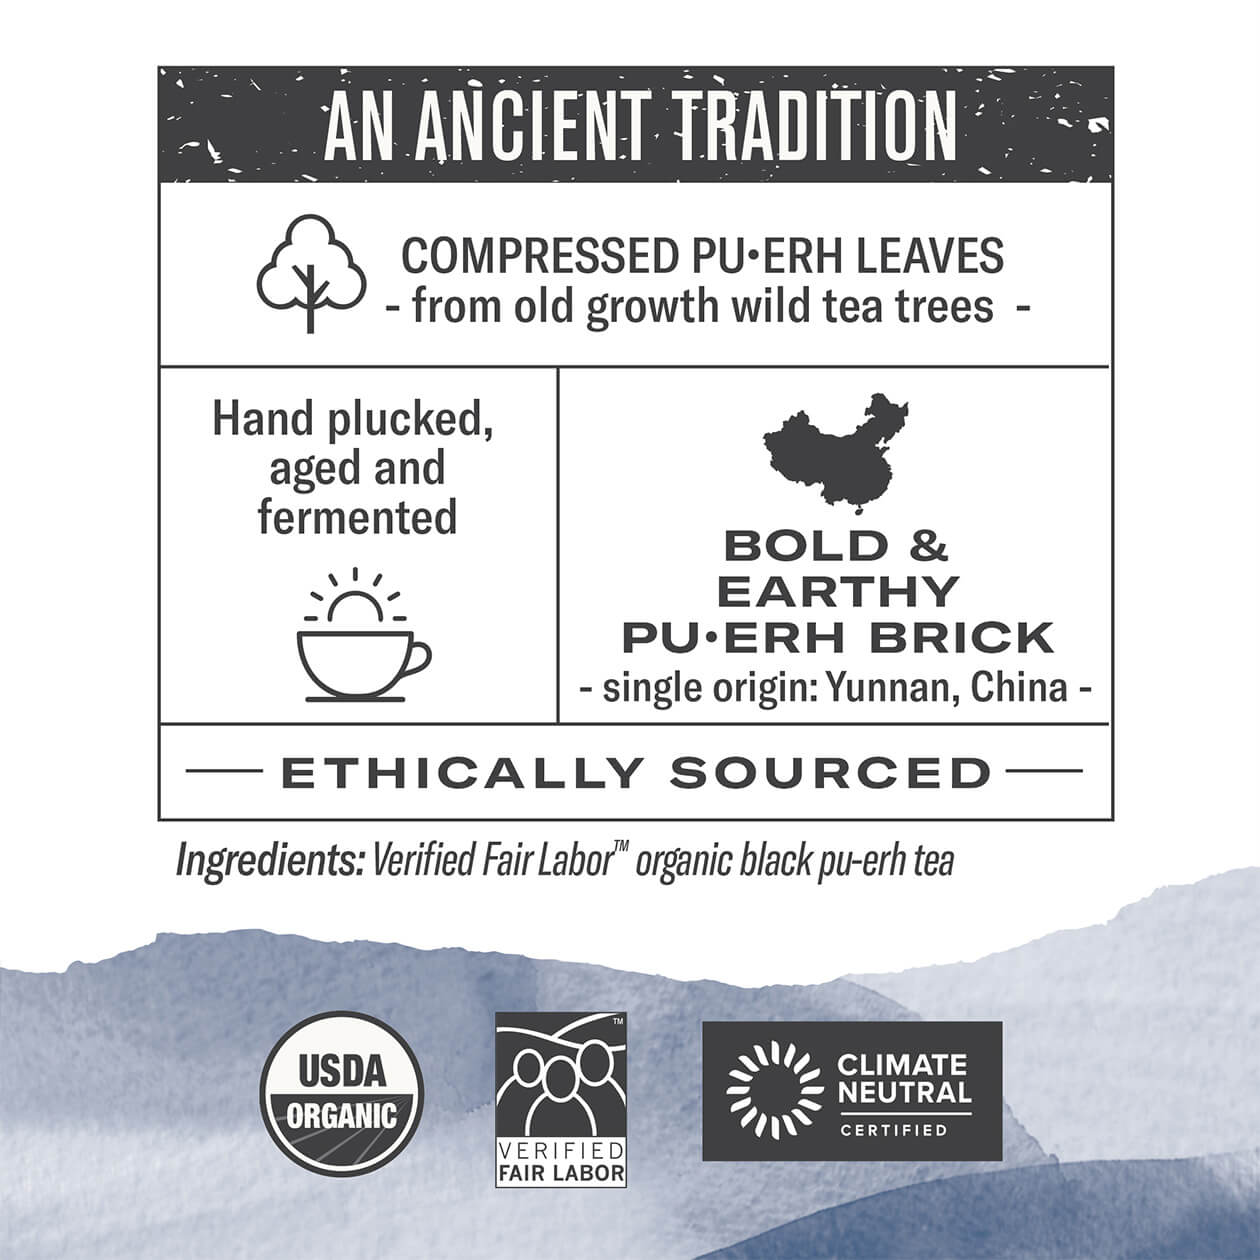 Infographic about Numi's Aged Puerh Brick, a fermented tea from Yunnan, China, Organic and Verified Fair Labor